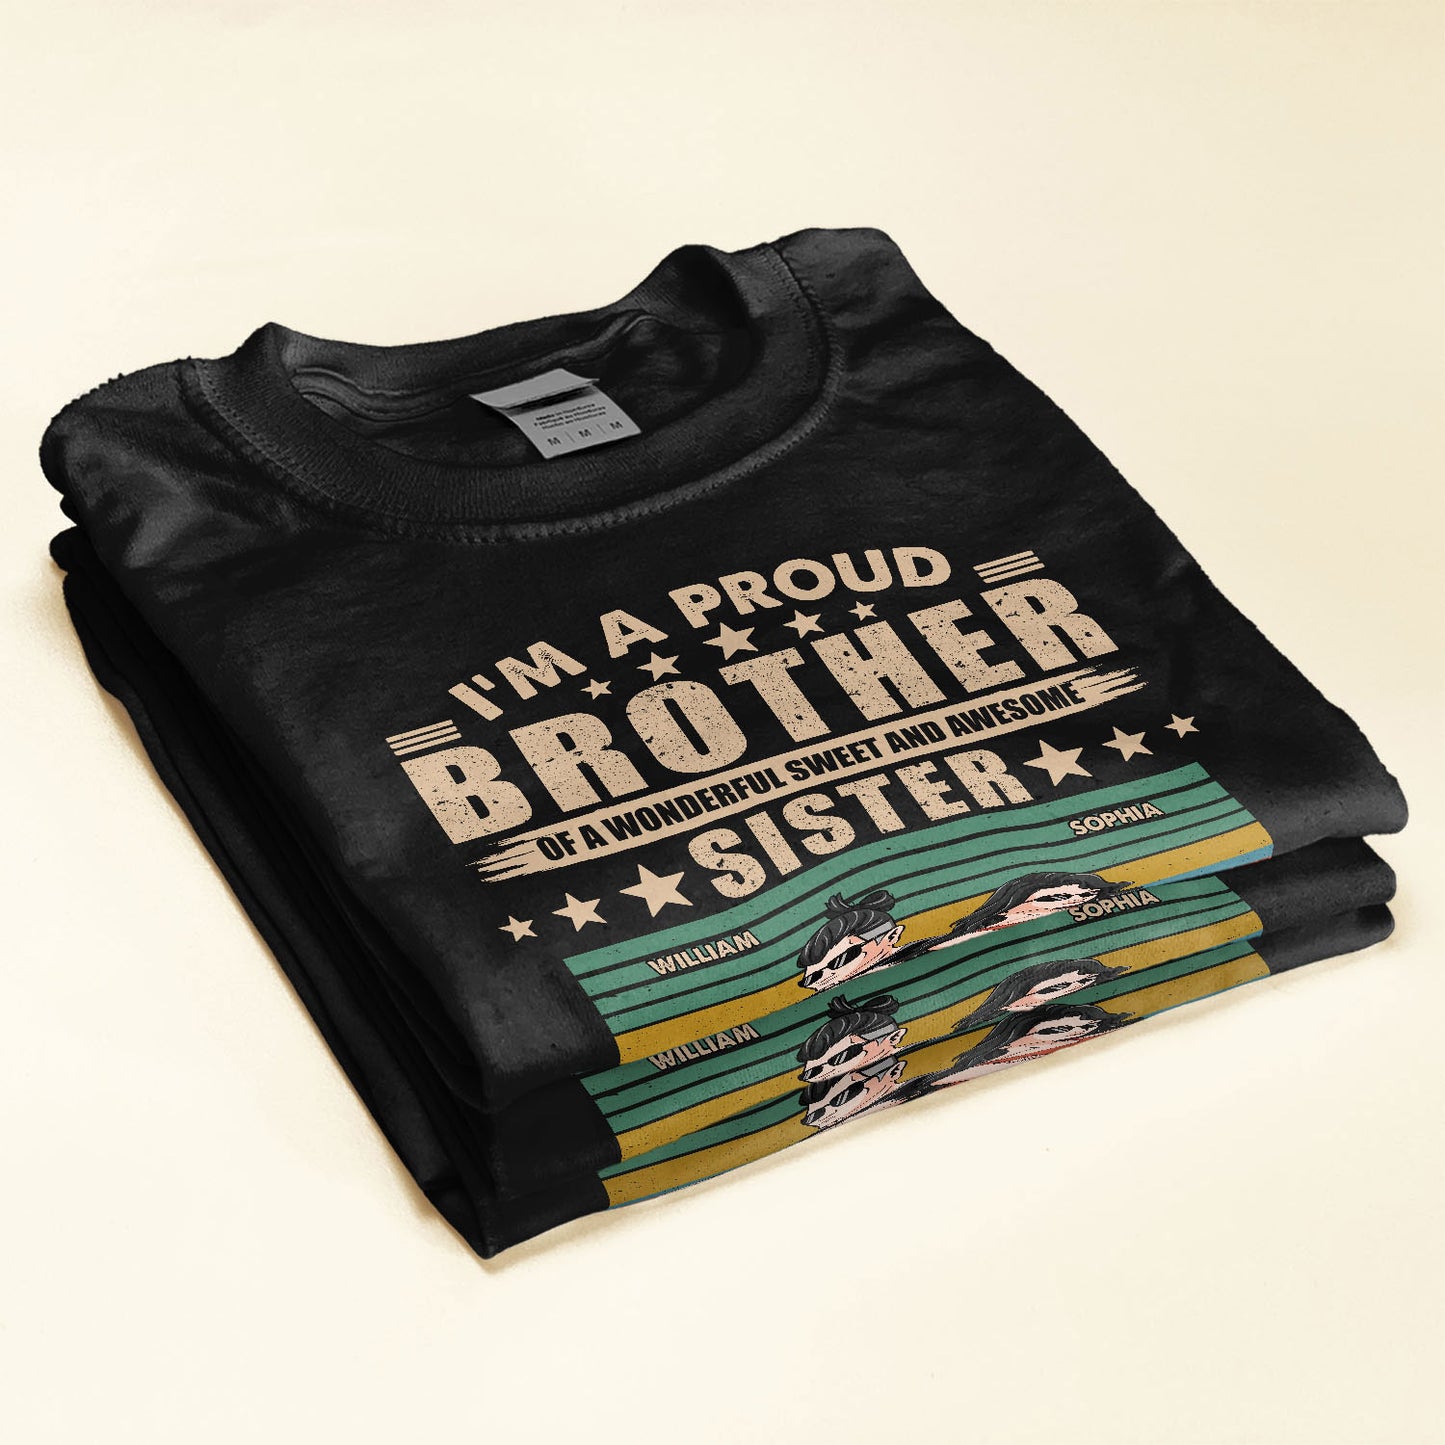 Proud Brother Of A Wonderful Sister - Personalized Shirt - Funny Birthday Gift For Brothers, Sons - Gift From Sisters, Mom